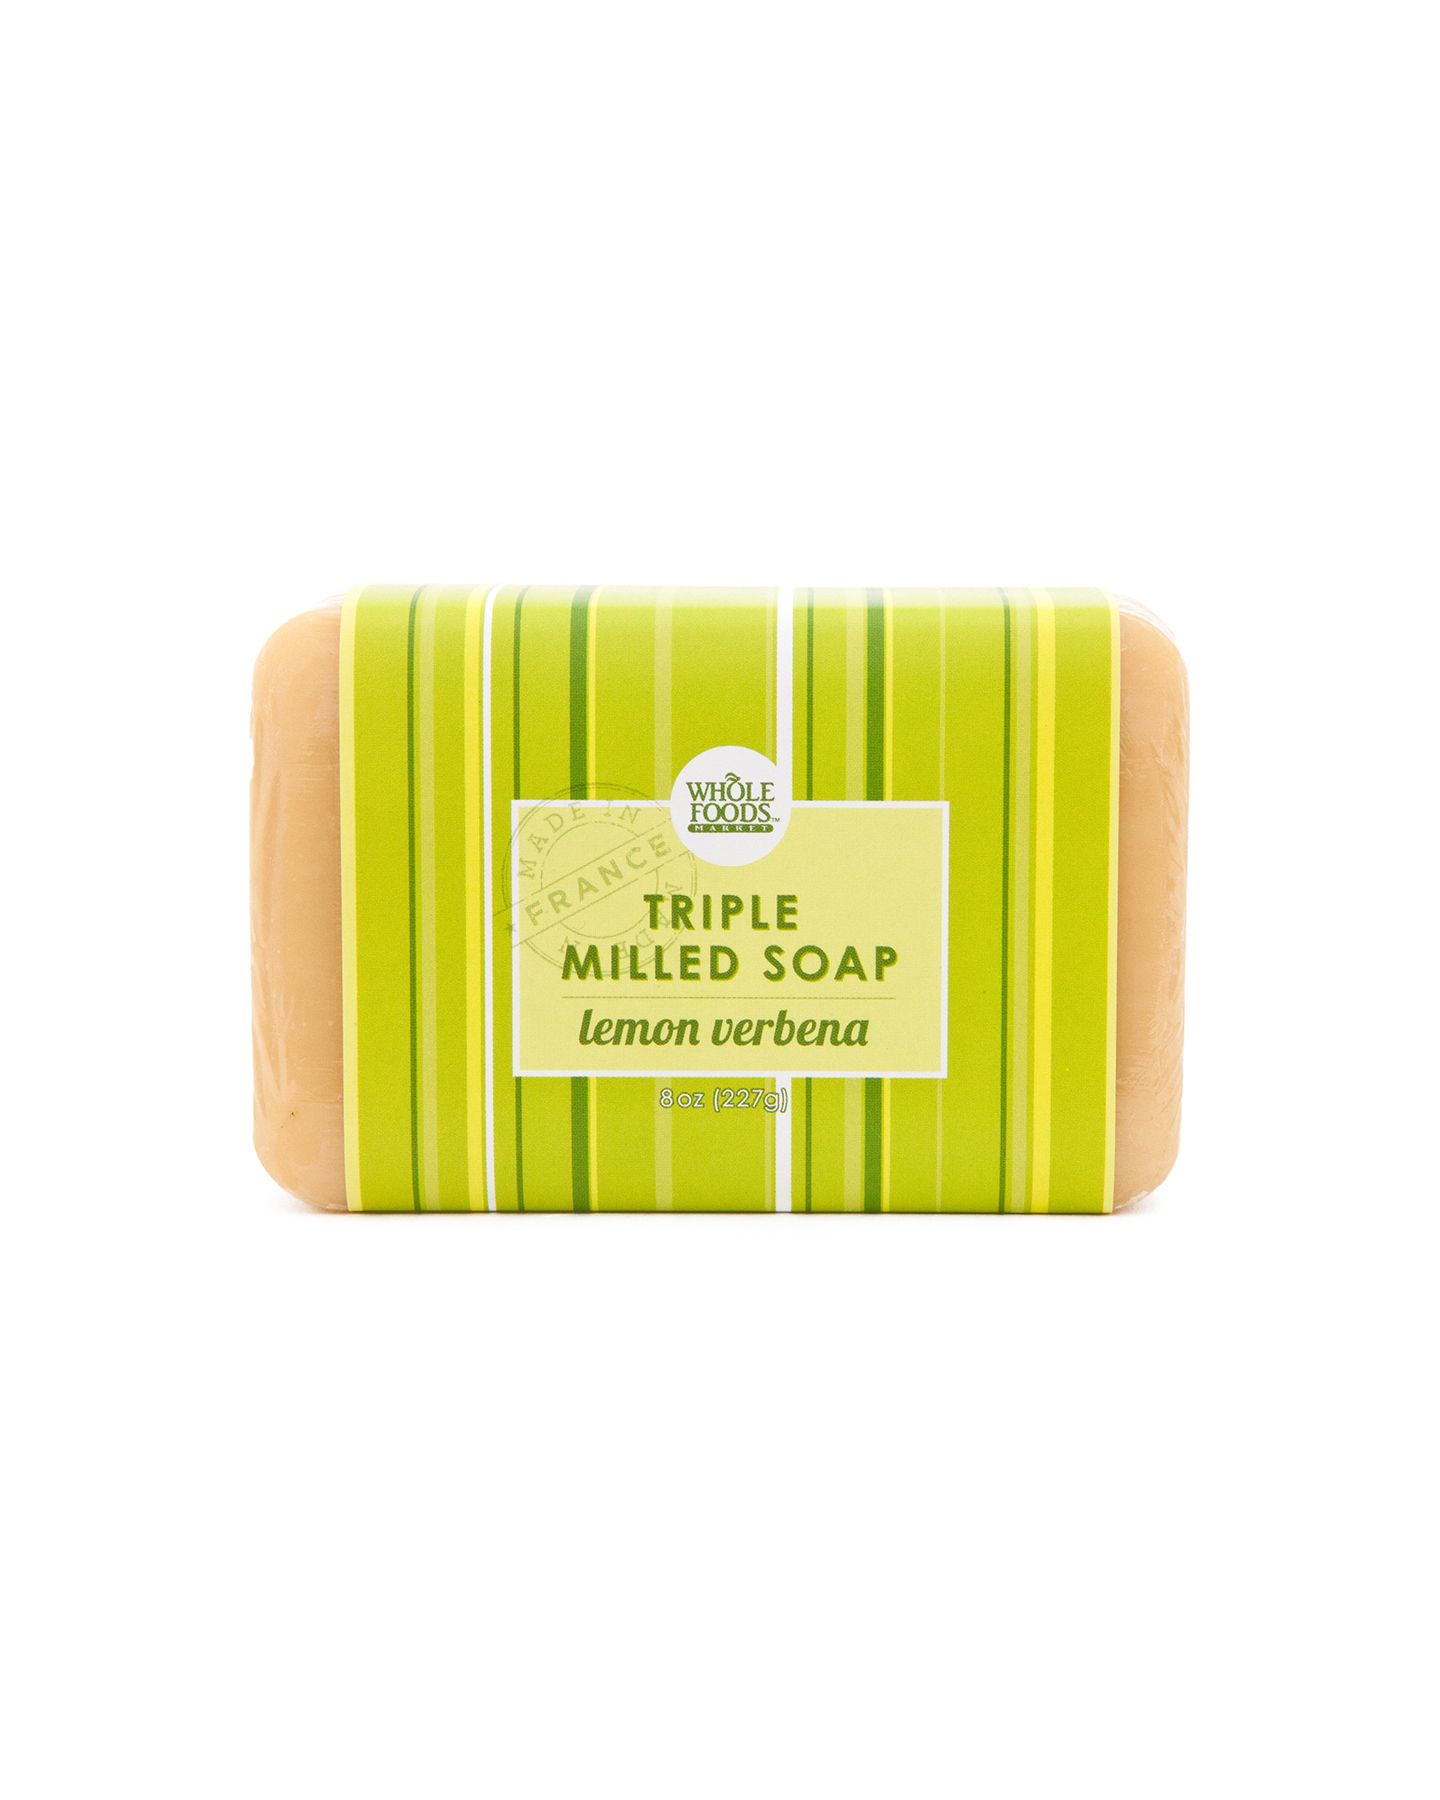 Whole Foods Triple Milled Soap